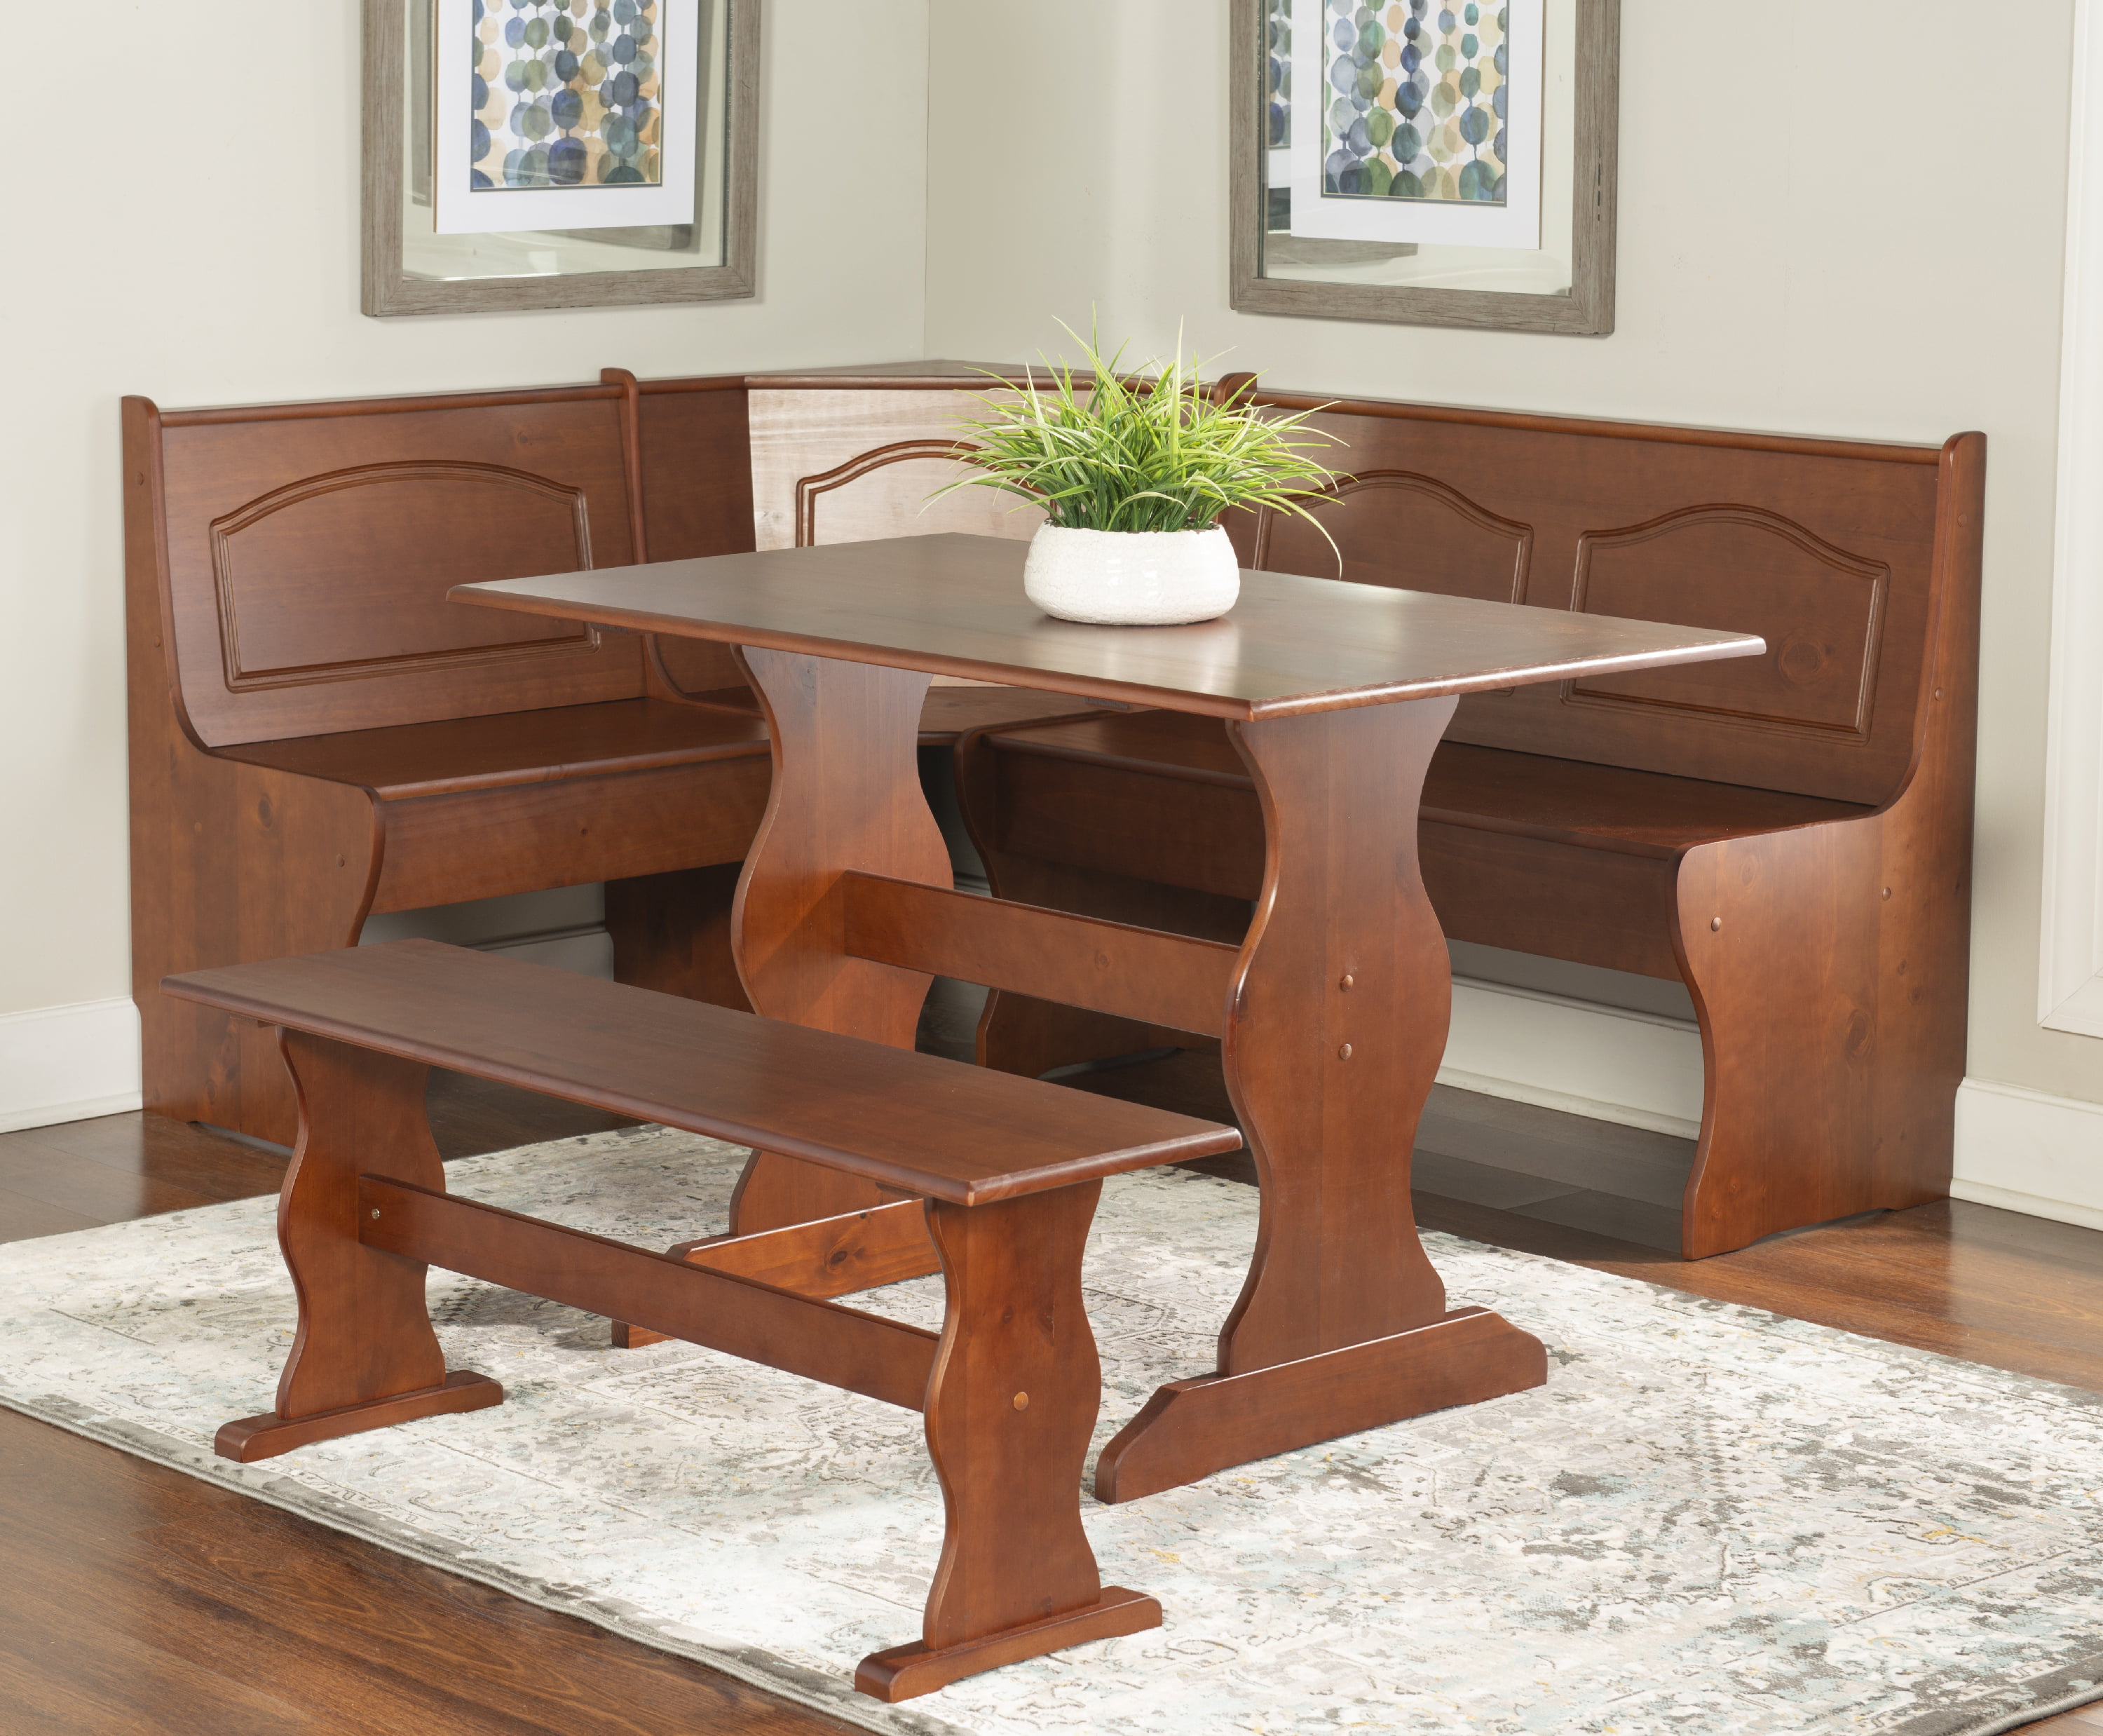 Details about   Breakfast Kitchen Nook Solid Wood Seat Dining Corner Bench Chelsea Cushion Set 